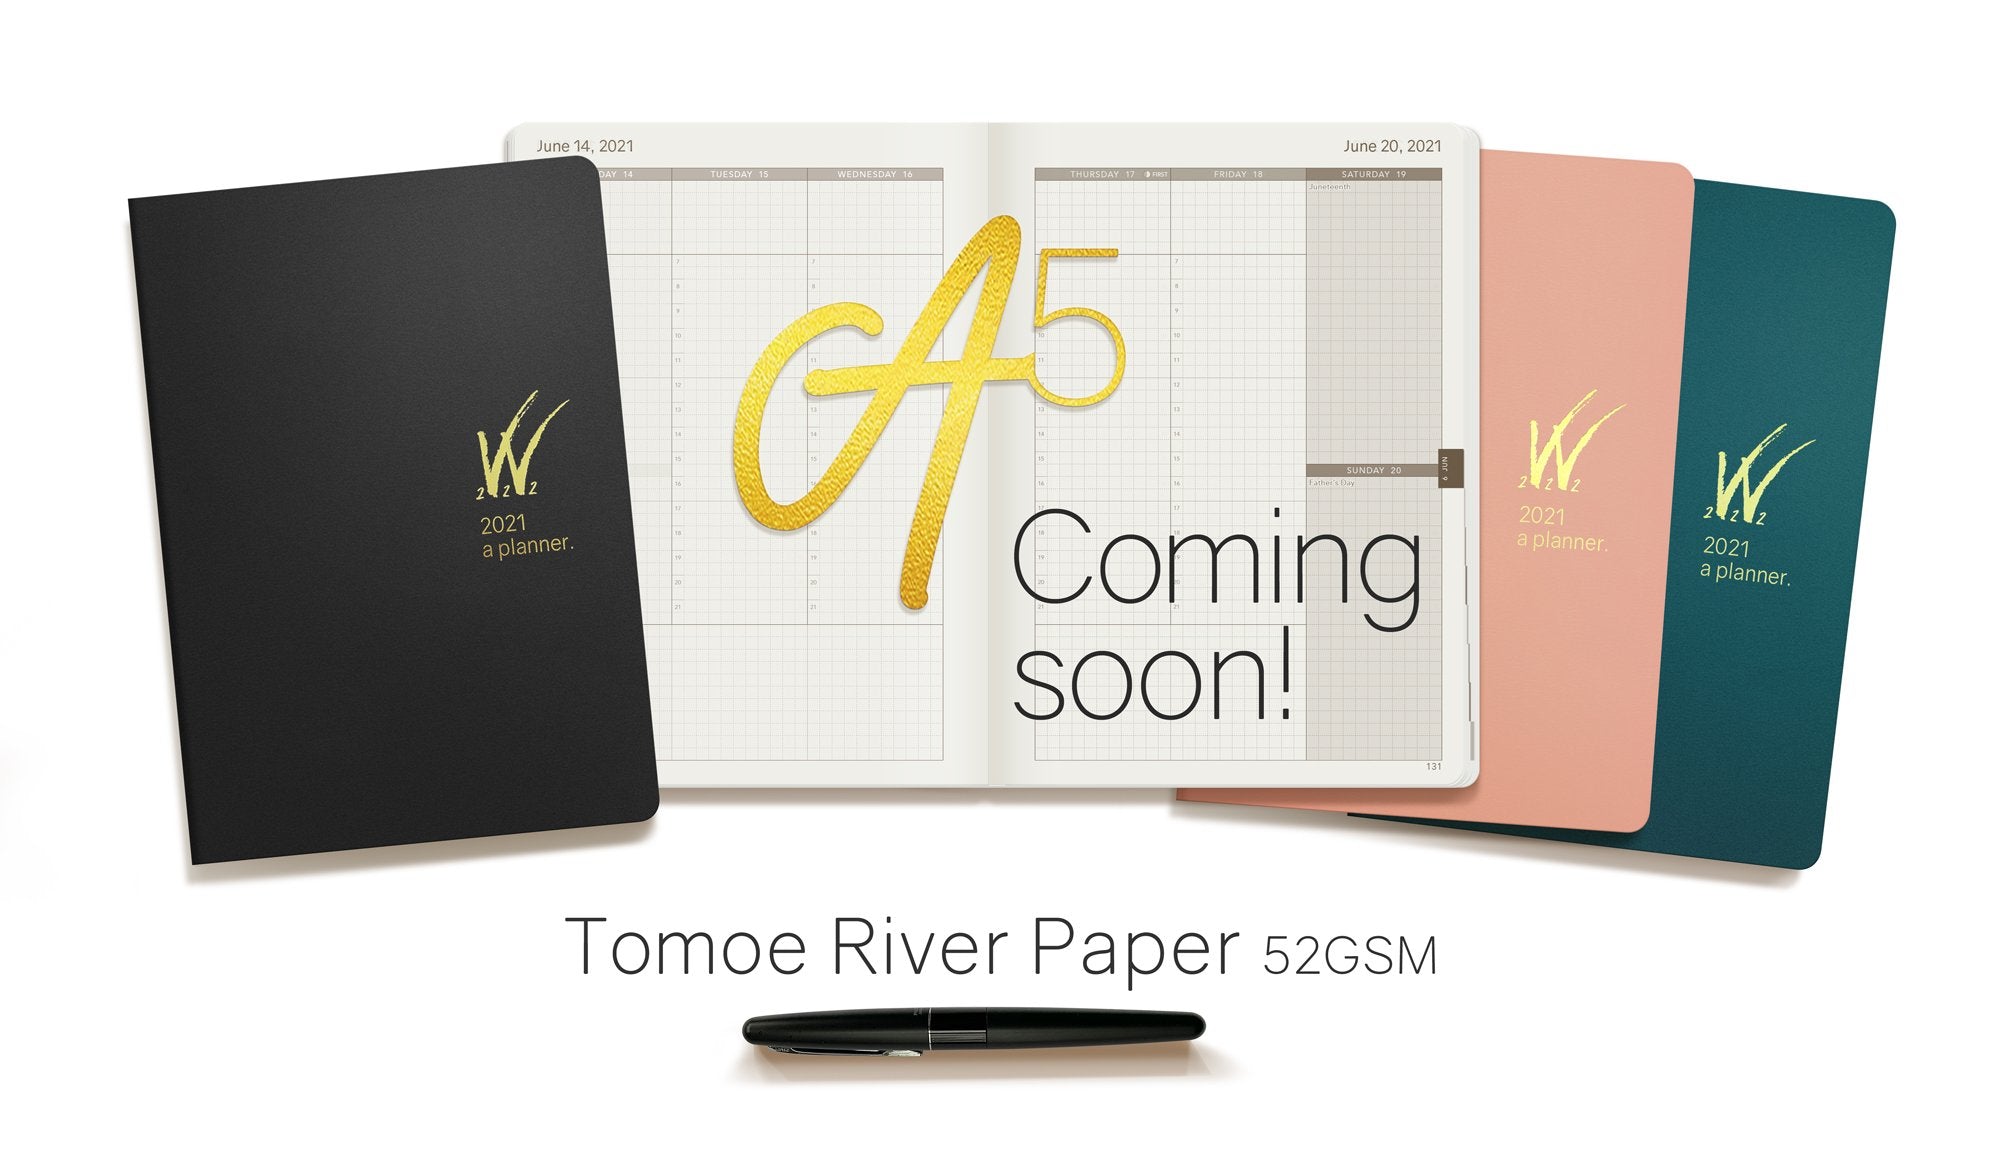 A5 2021 Tomoe River Paper Planner featuring 52gsm TRP by Wonderland 222